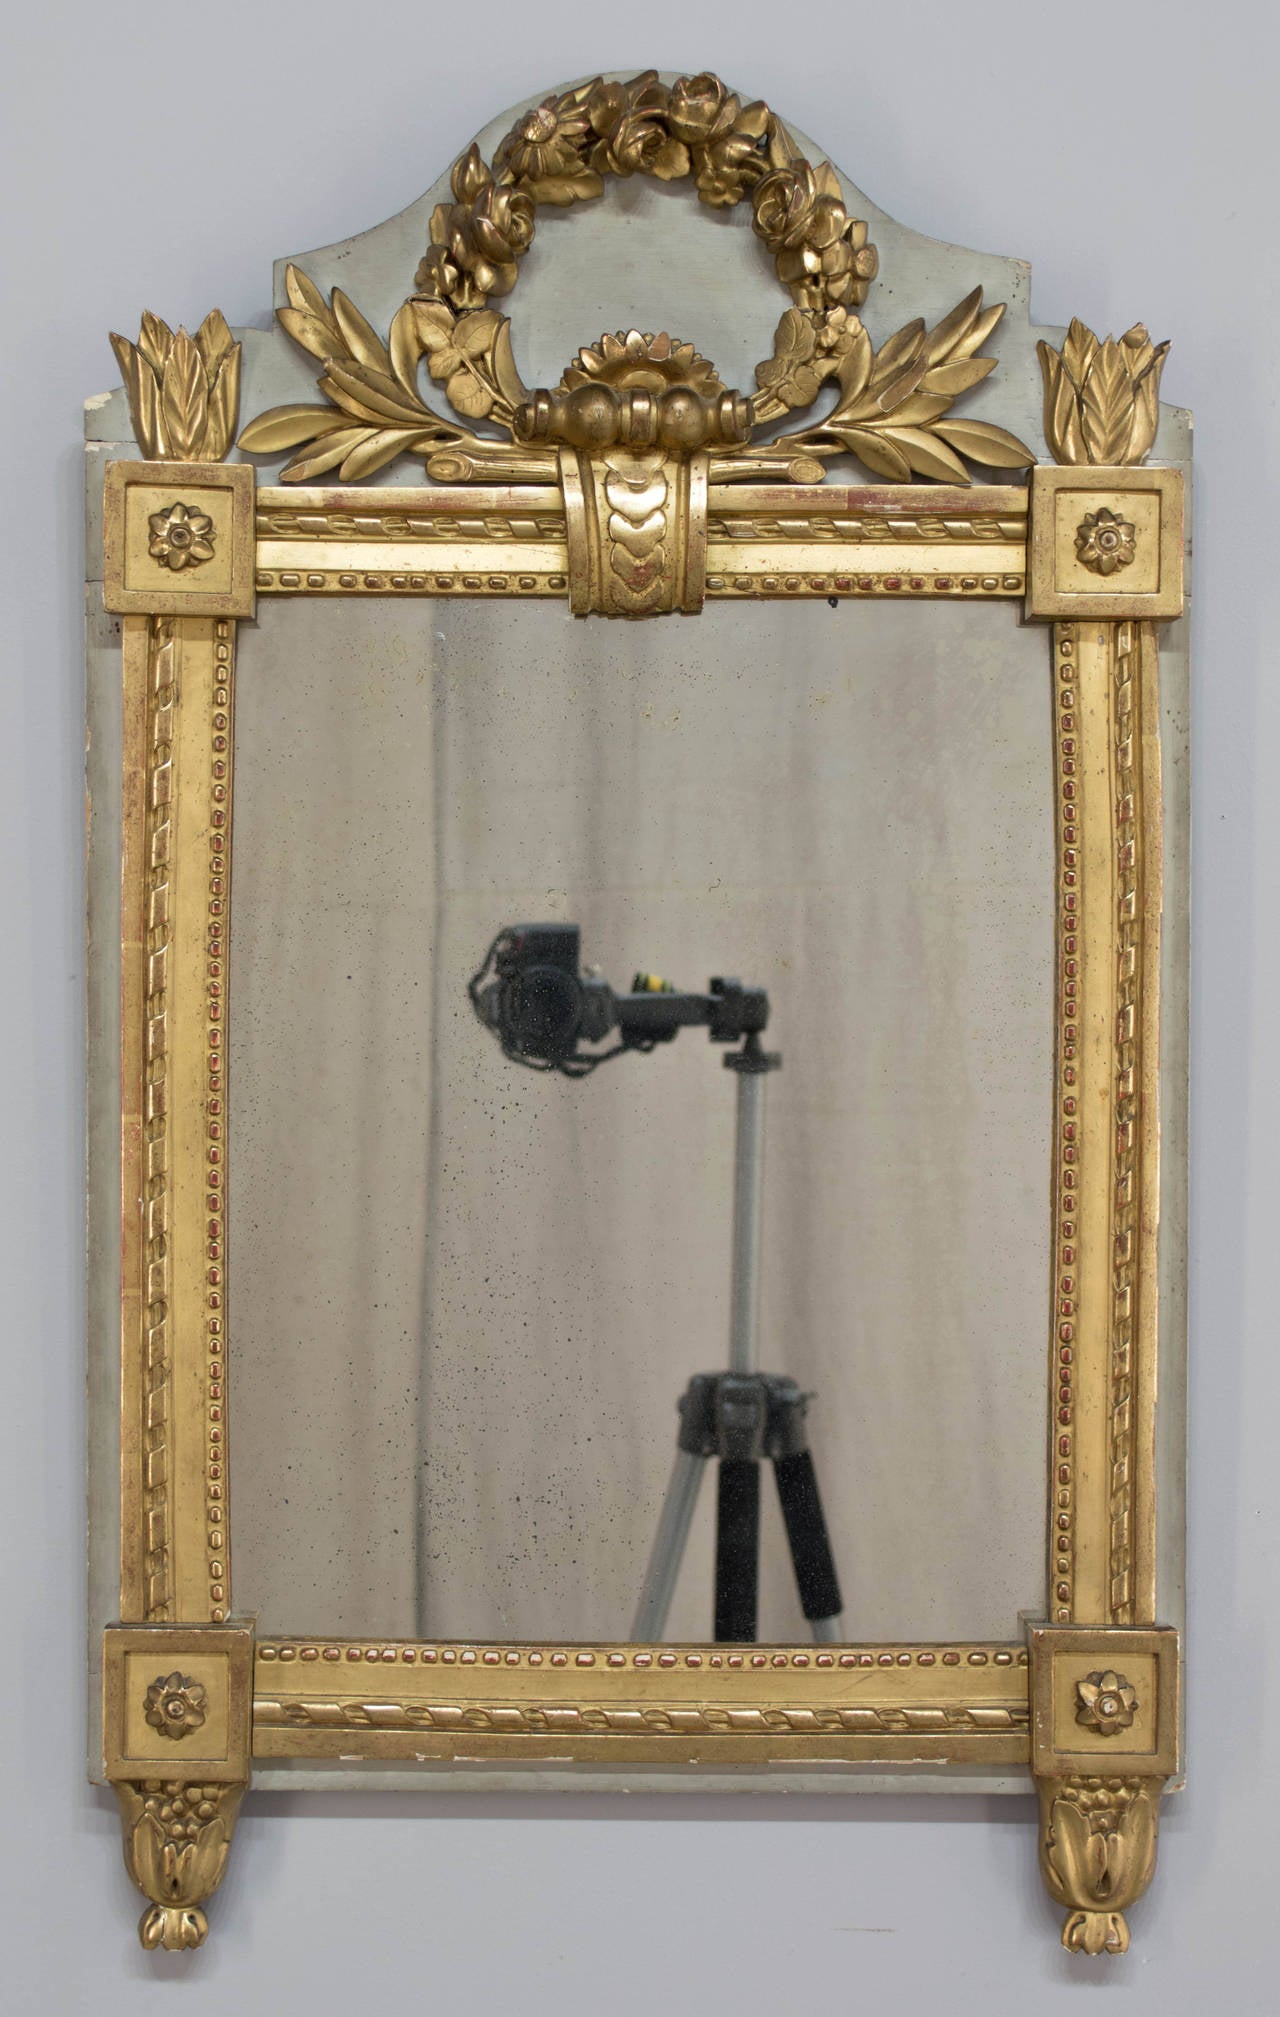 19th c. French Louis XVI style mirror. Nice carving of floral wreath and scroll in high relief, with rosettes at the corners. Gilt frame is over verdigris painted background panel. In very good condition with small paint loss on upper left corner